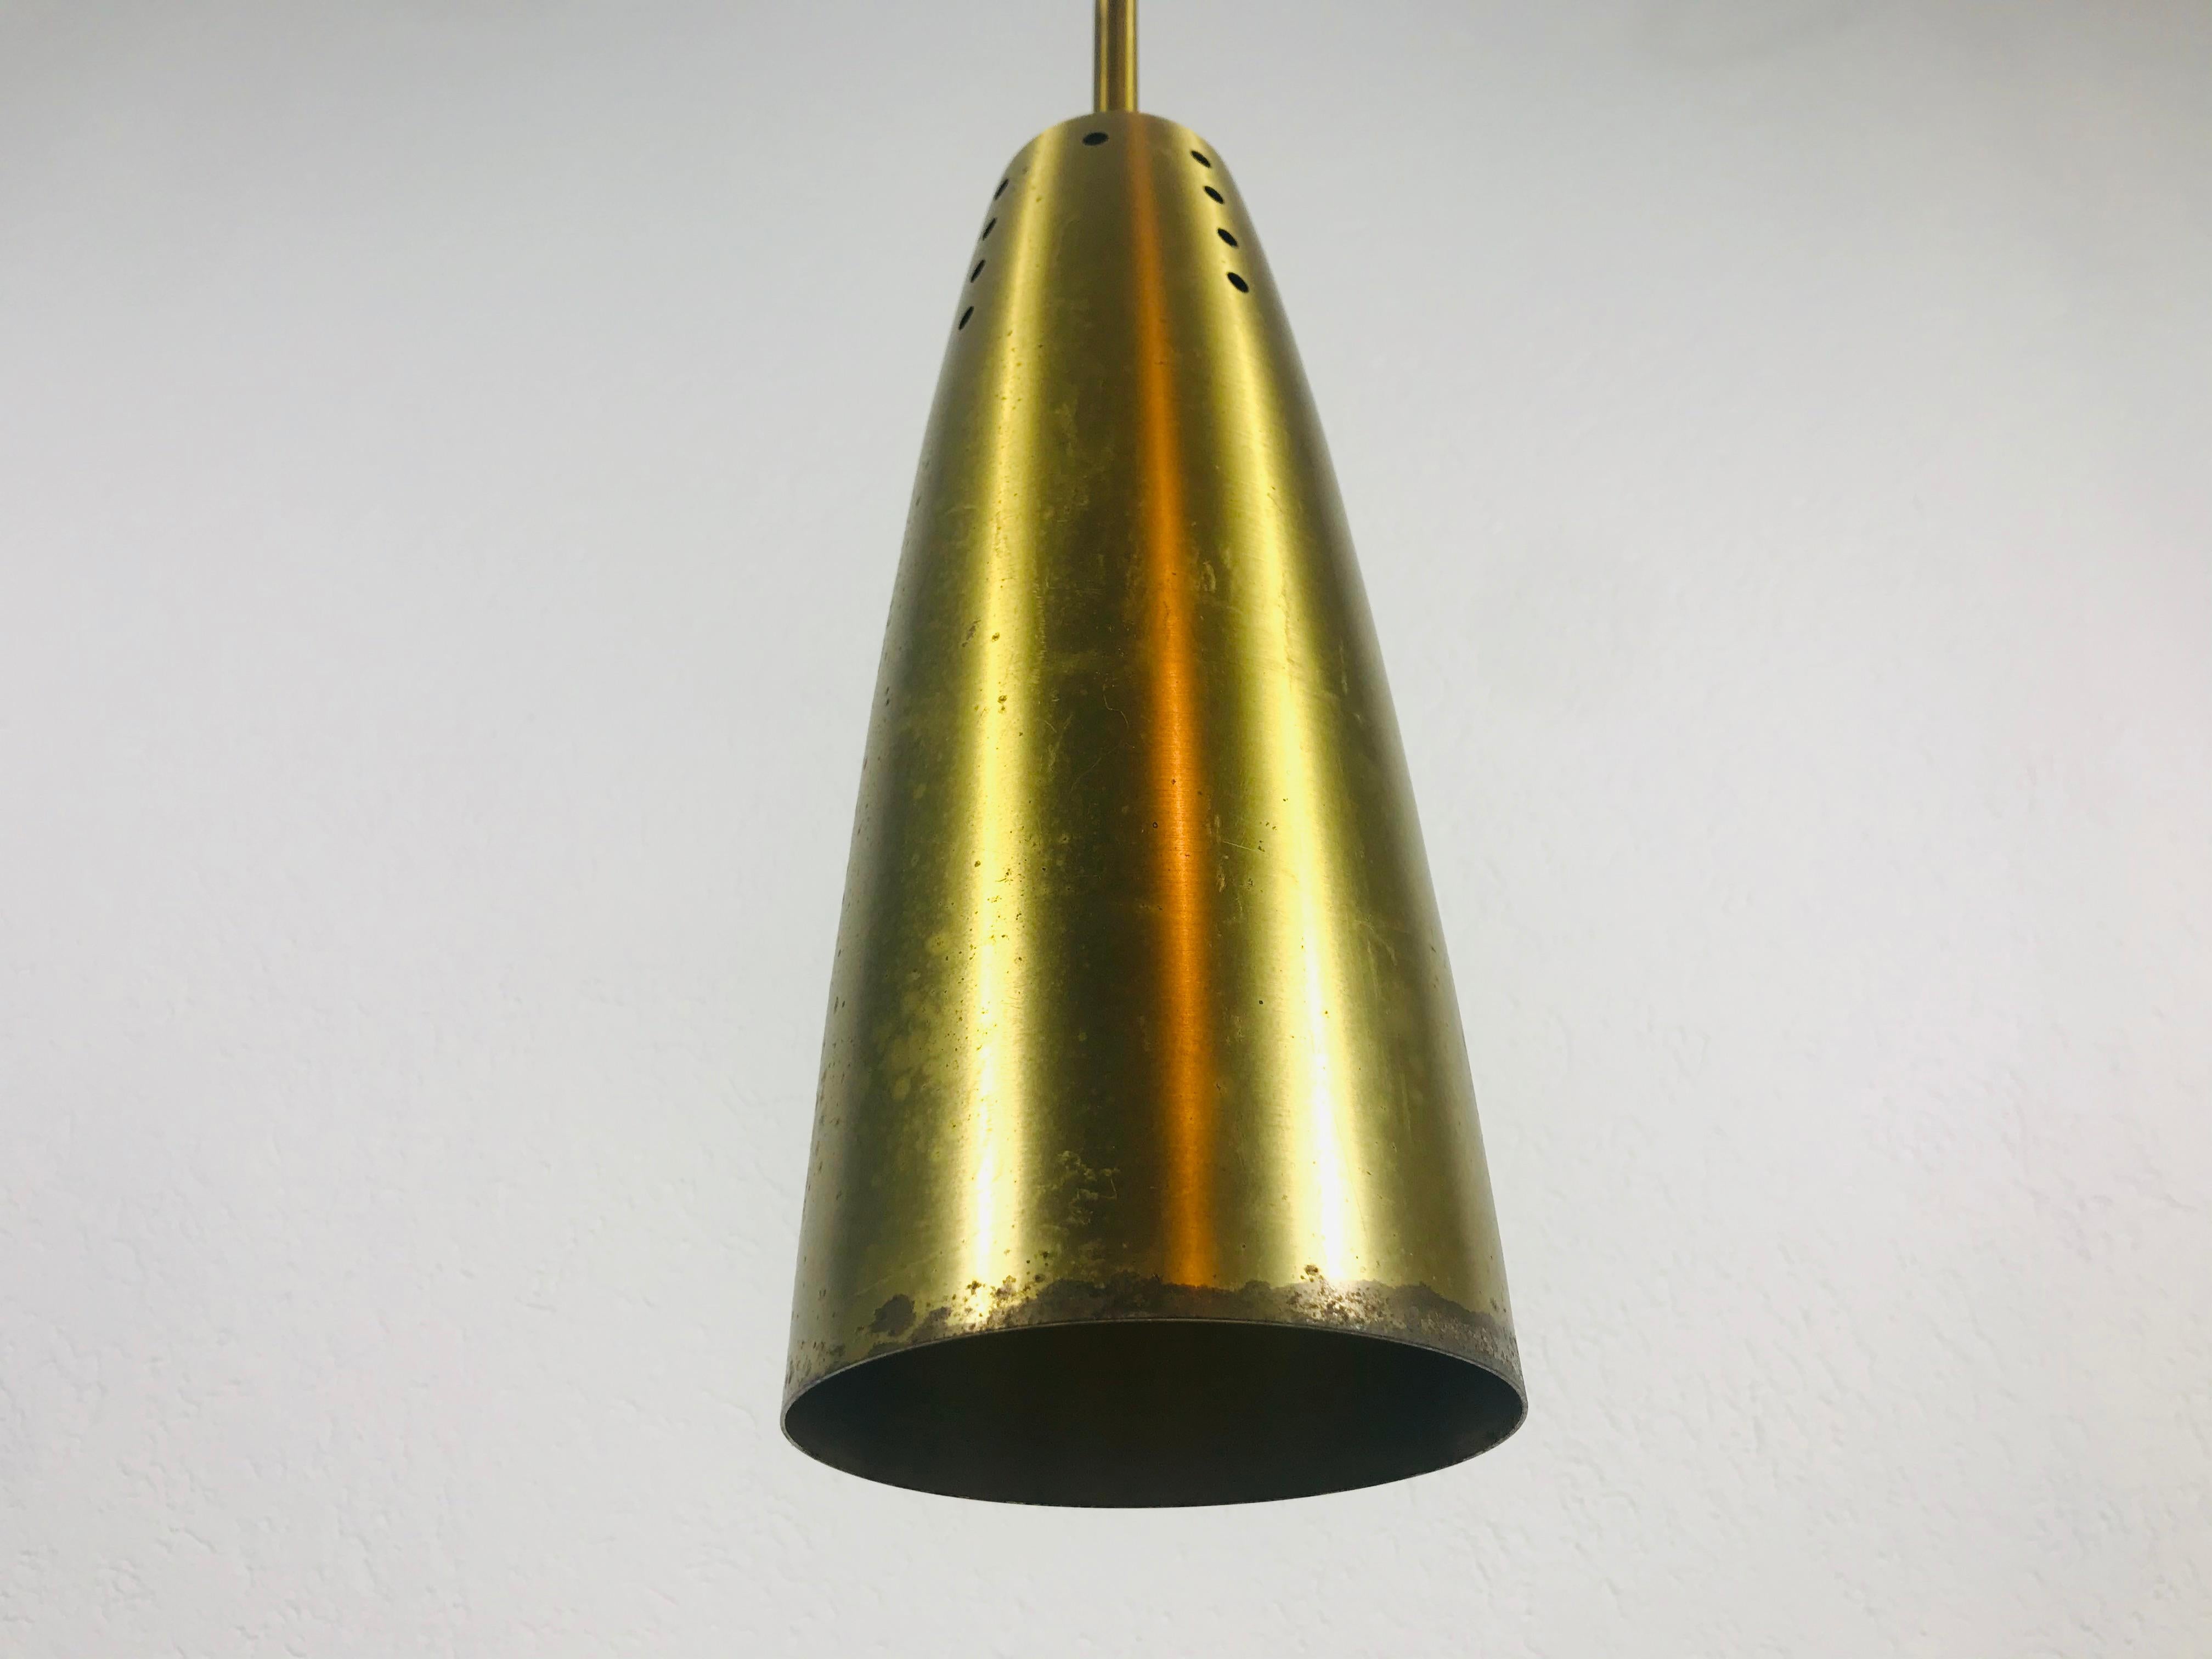 Mid-20th Century Set of 3 Full Brass Mid-Century Modern Pendant Lamps, 1950s, Germany For Sale